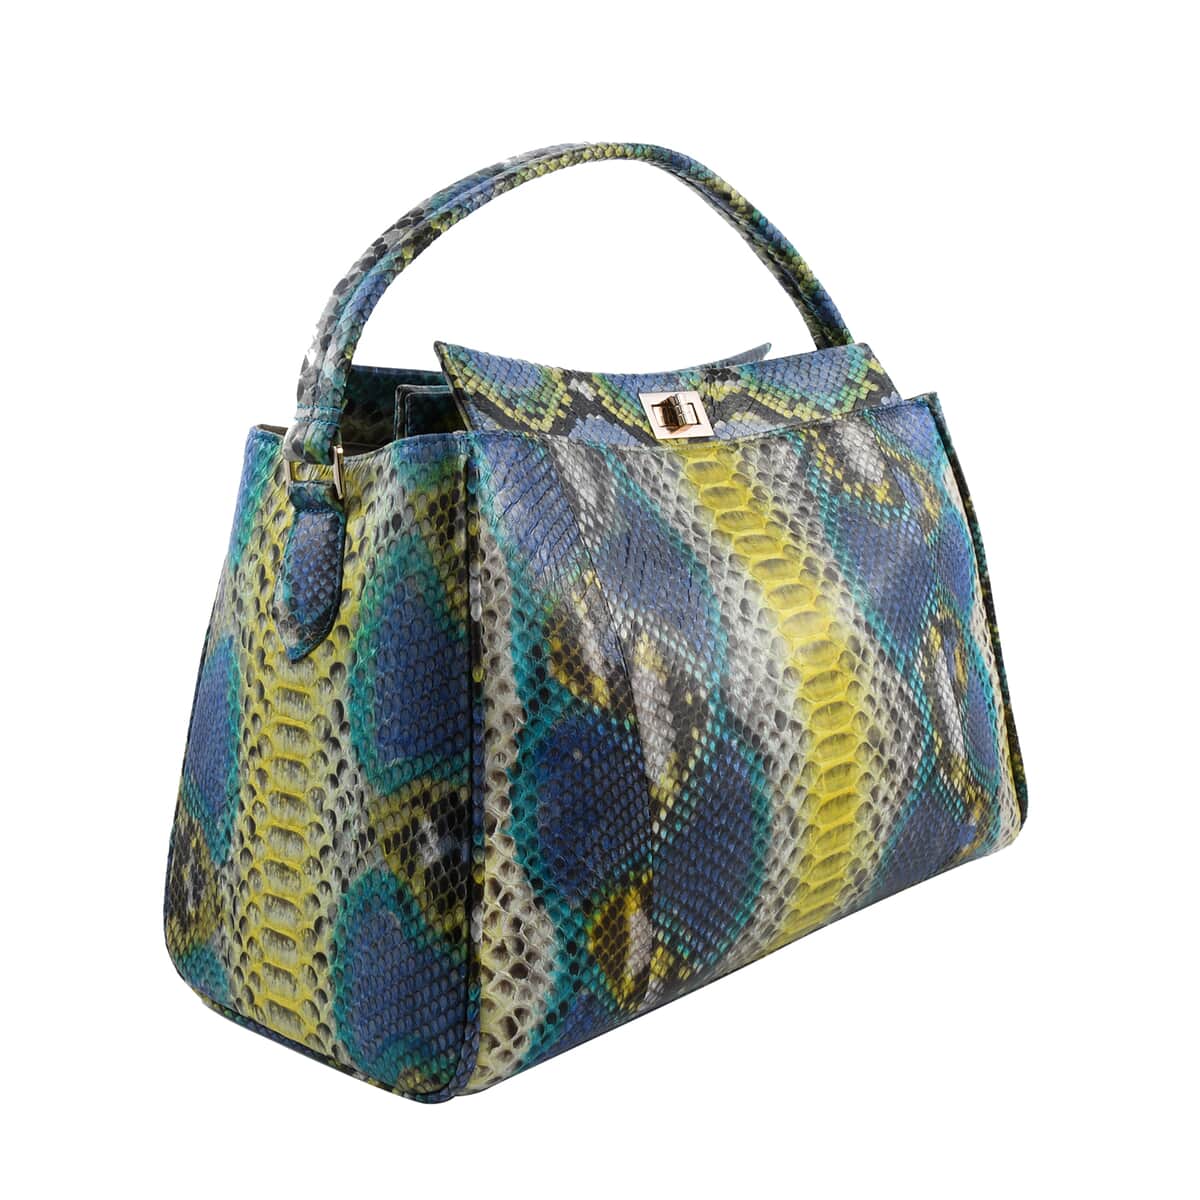 The Pelle Python Collection Handmade 100% Genuine Python Leather Blue & Yellow Tote Bag (14.75"x9.2"x6") with Detachable and Adjustable Strap image number 2